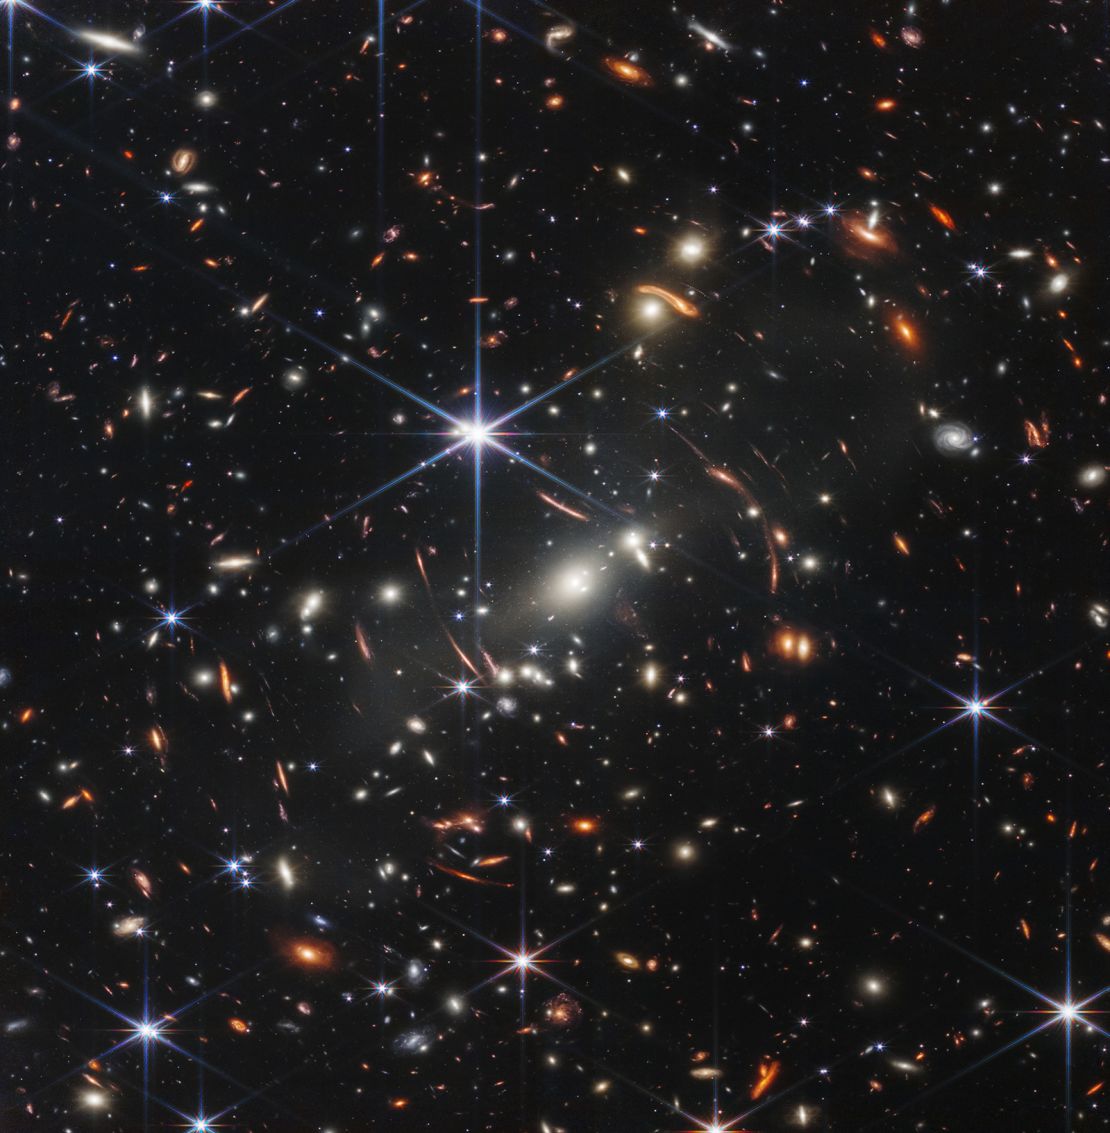 The image of SMACS 0723 is "the deepest and sharpest infrared image of the distant universe to date," according to NASA. 